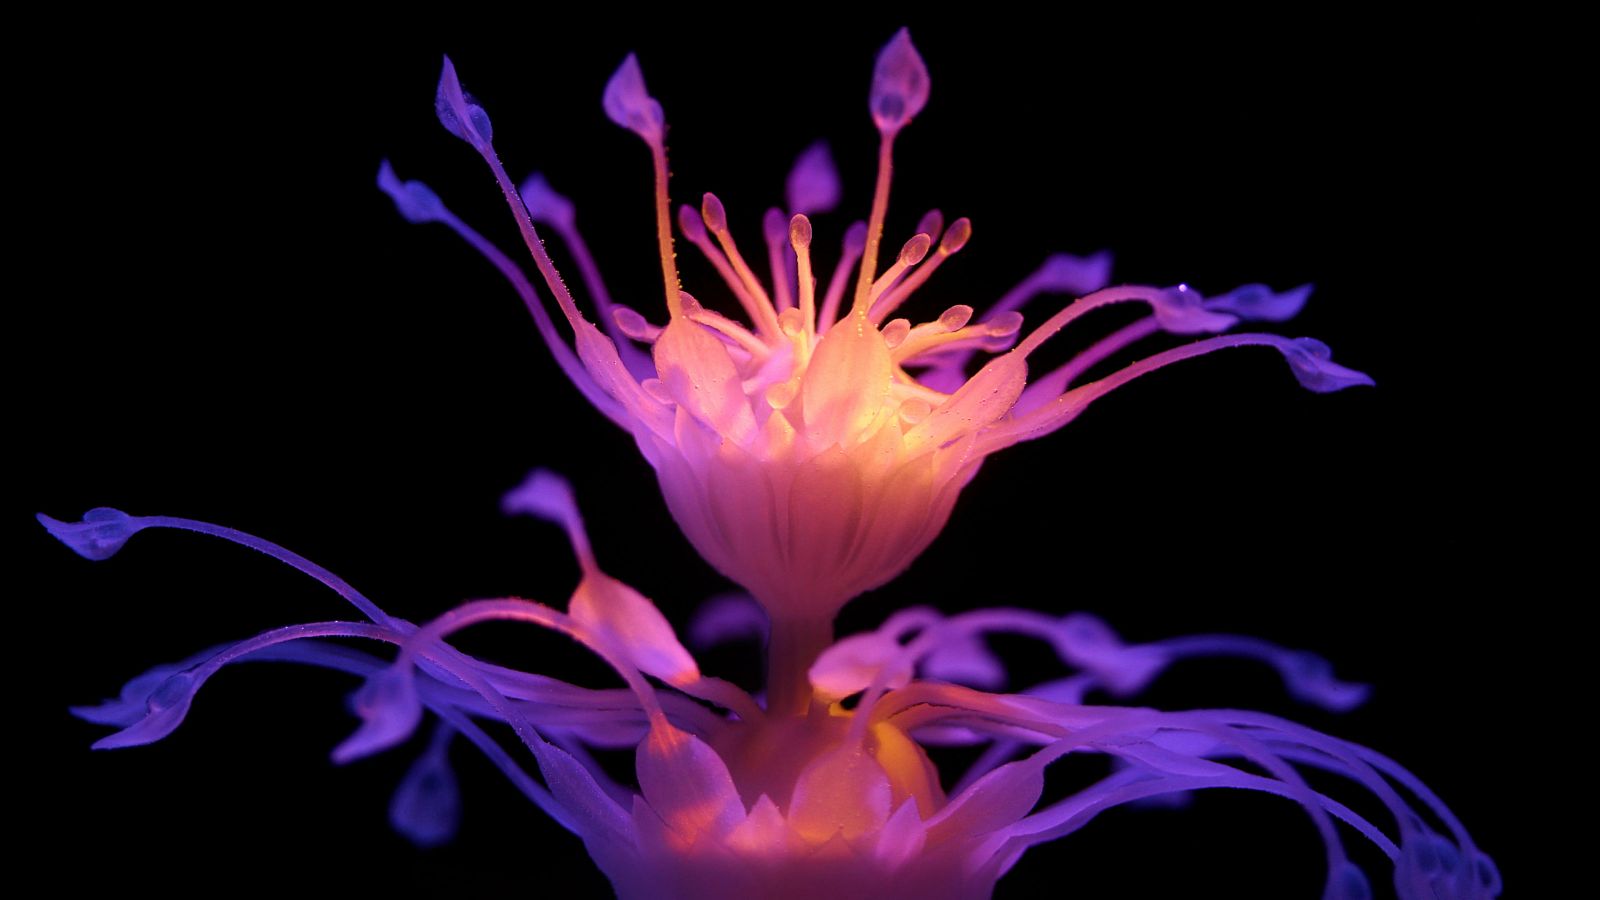 3D printed pink flower with tendrils, 'Haven flower' – a Hydrophyte created by Nicole Hone.